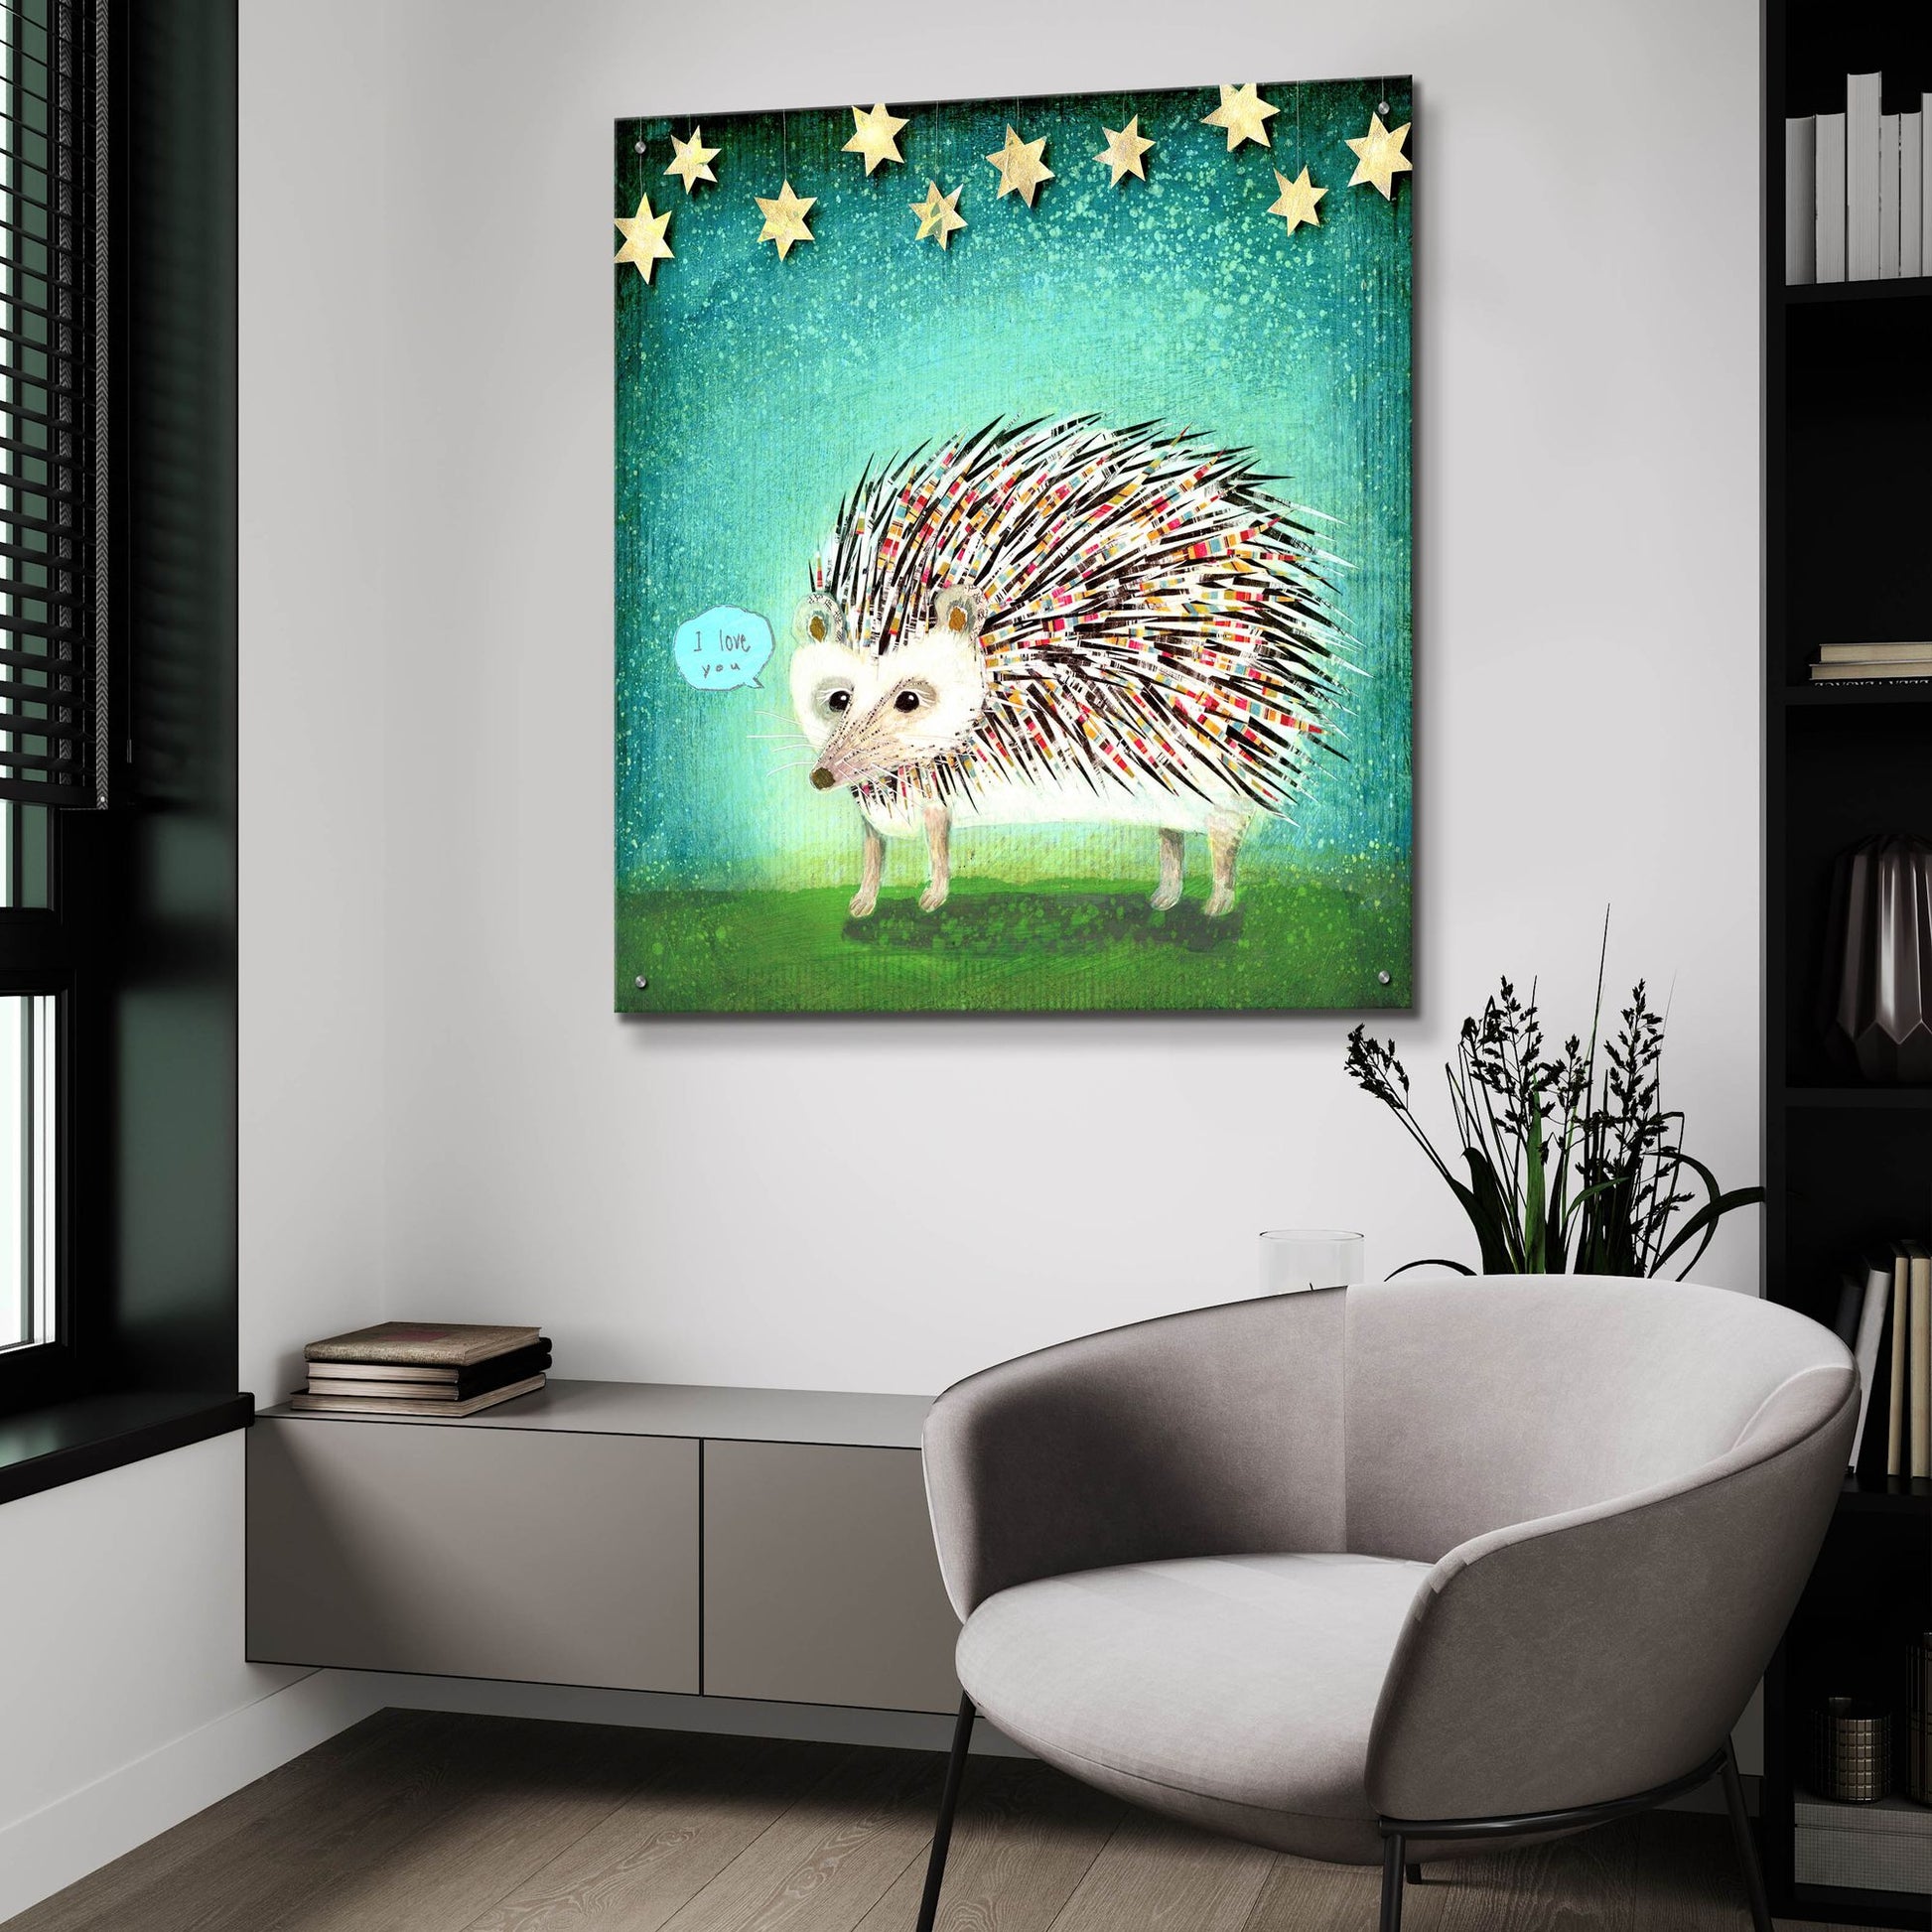 Epic Art 'Porcupine For Thomas' by Judy Verhoeven, Acrylic Glass Wall Art,36x36